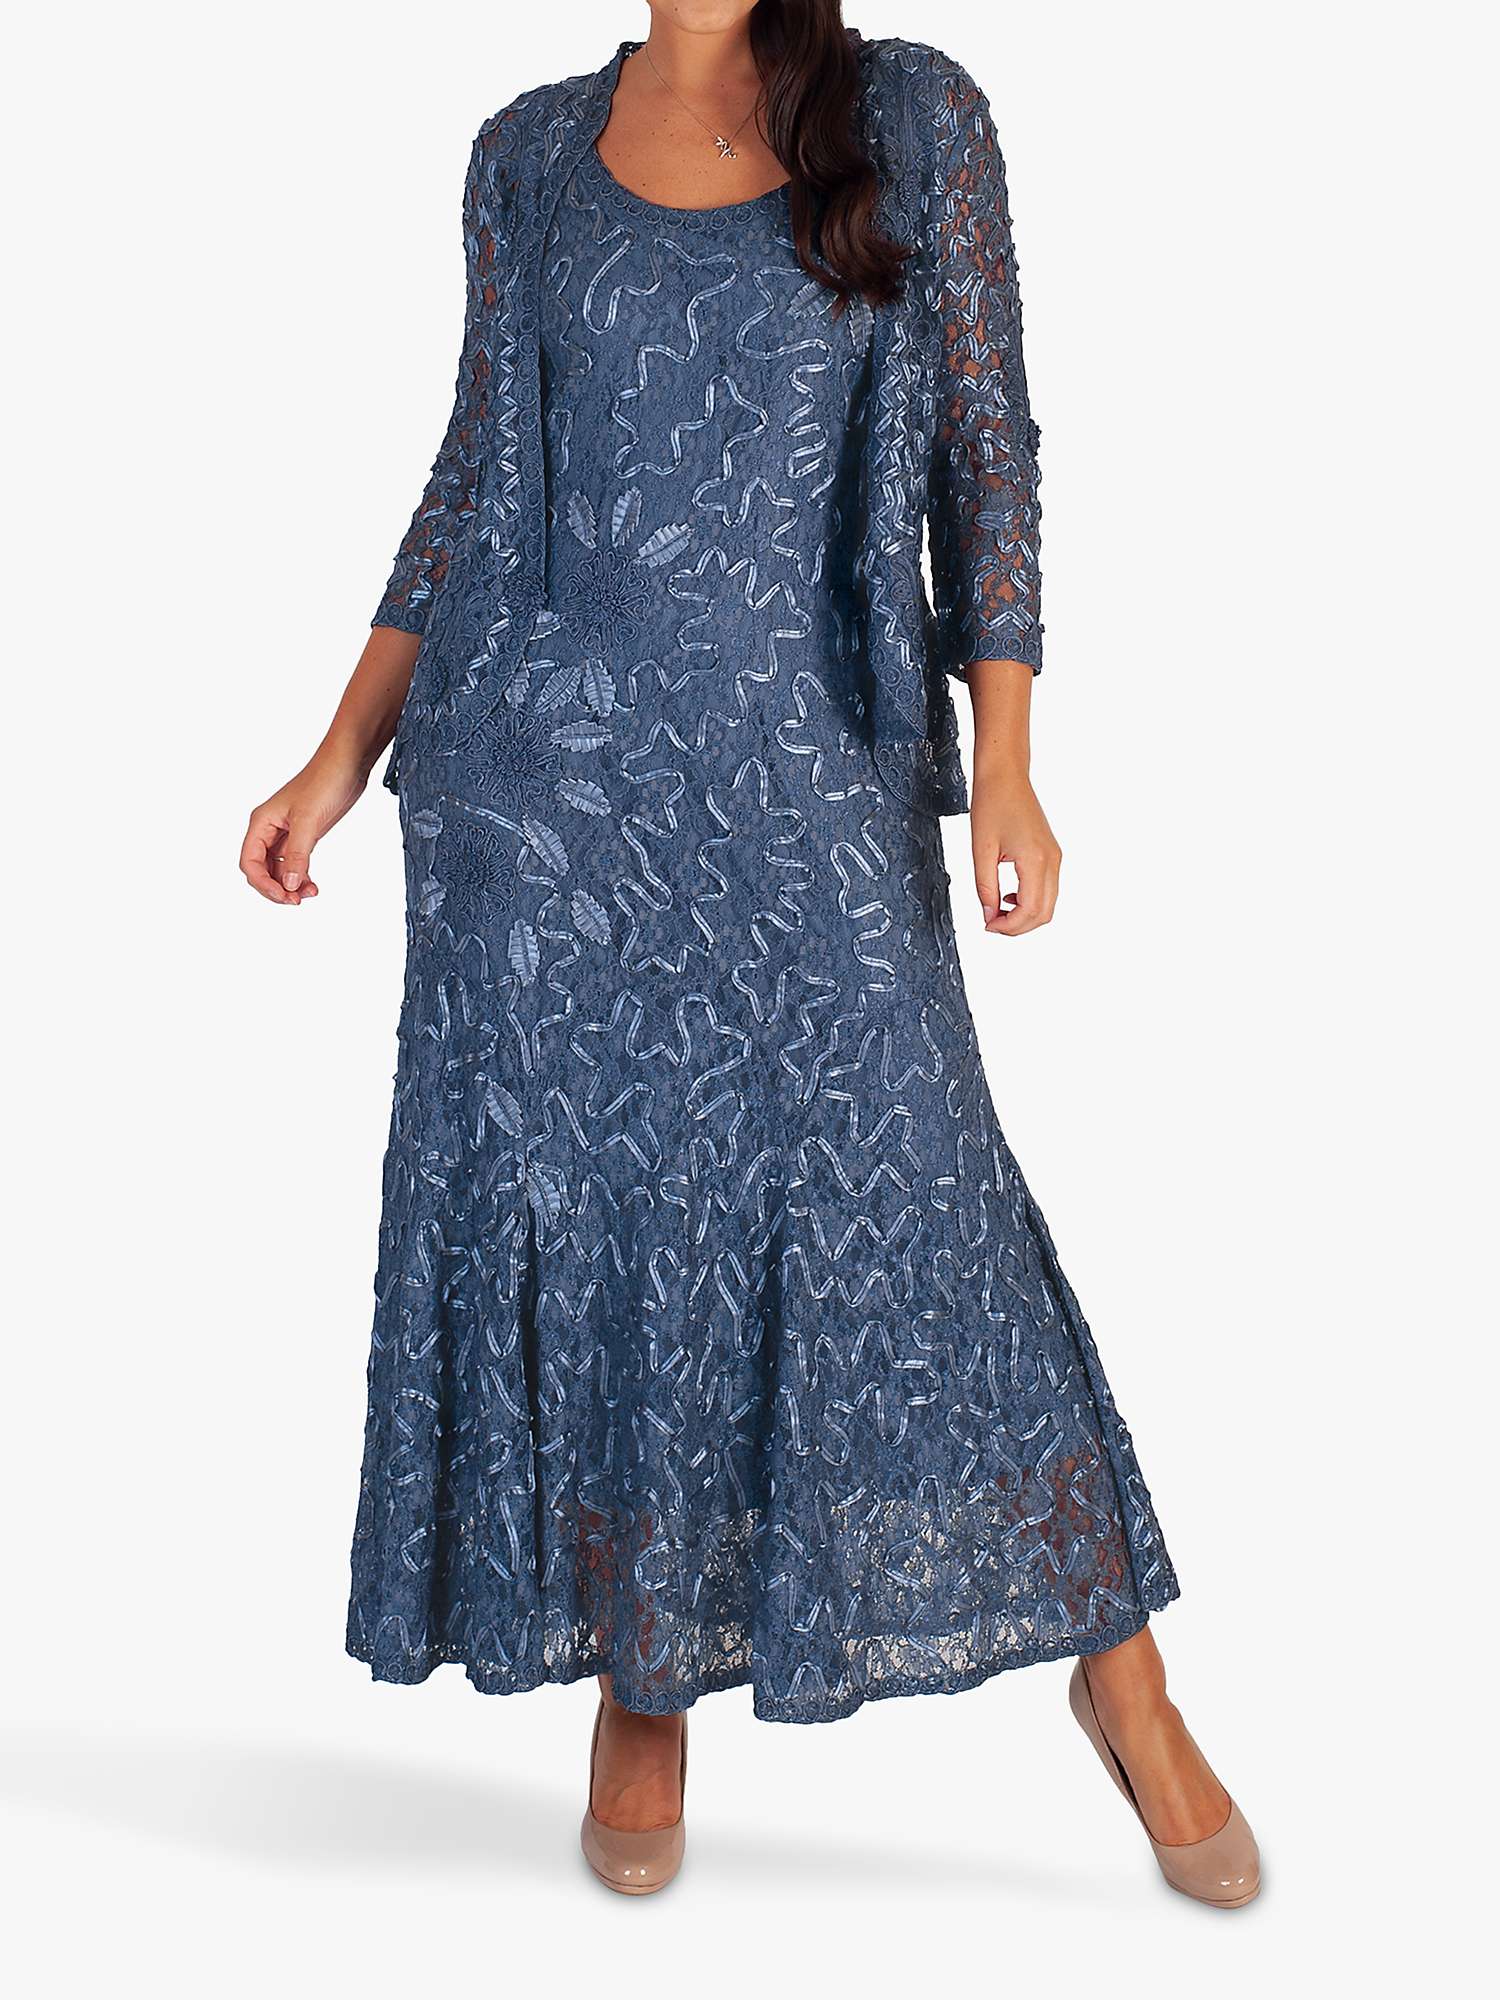 Buy Chesca Lace Cornelli Dress Online at johnlewis.com